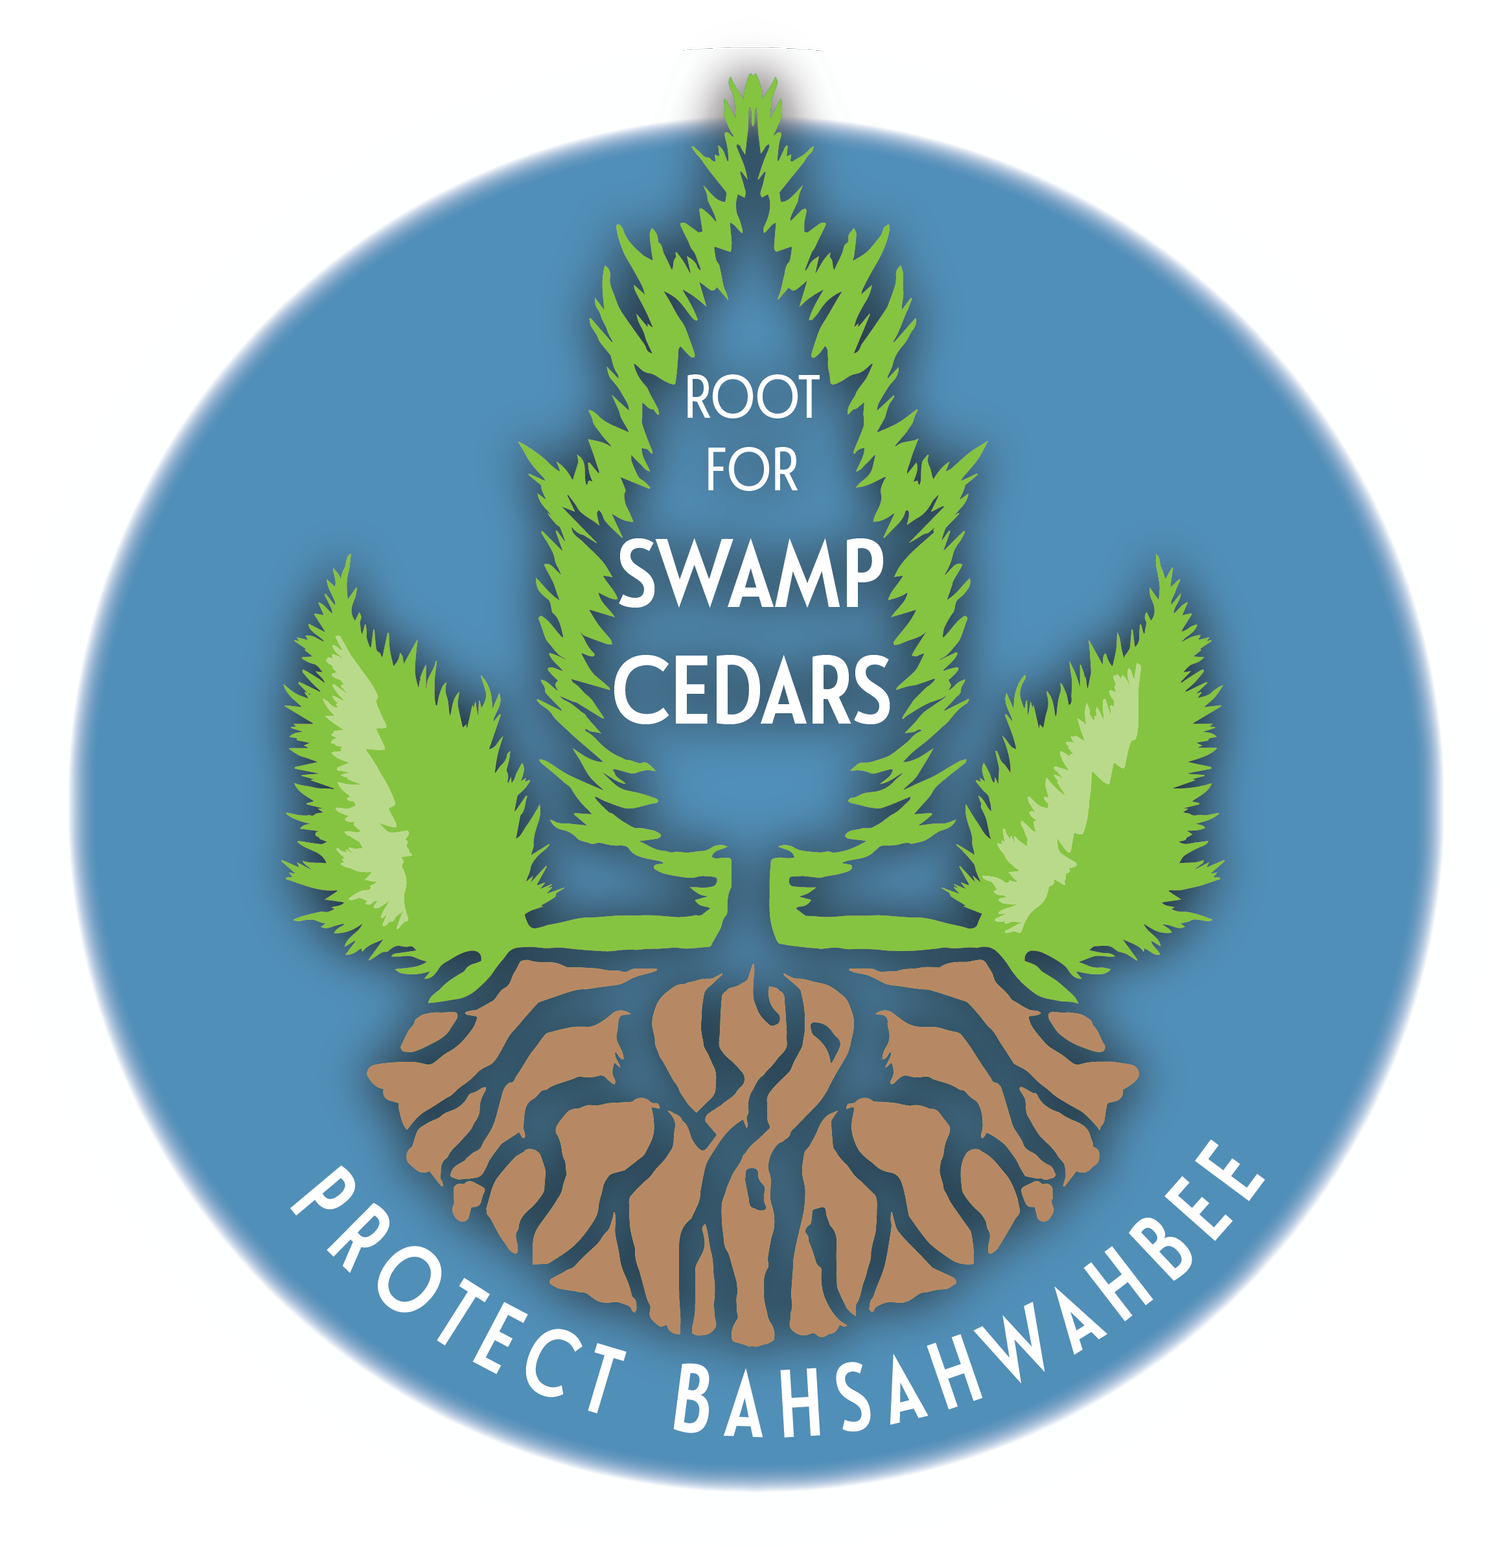 Root for the Swamp Cedars